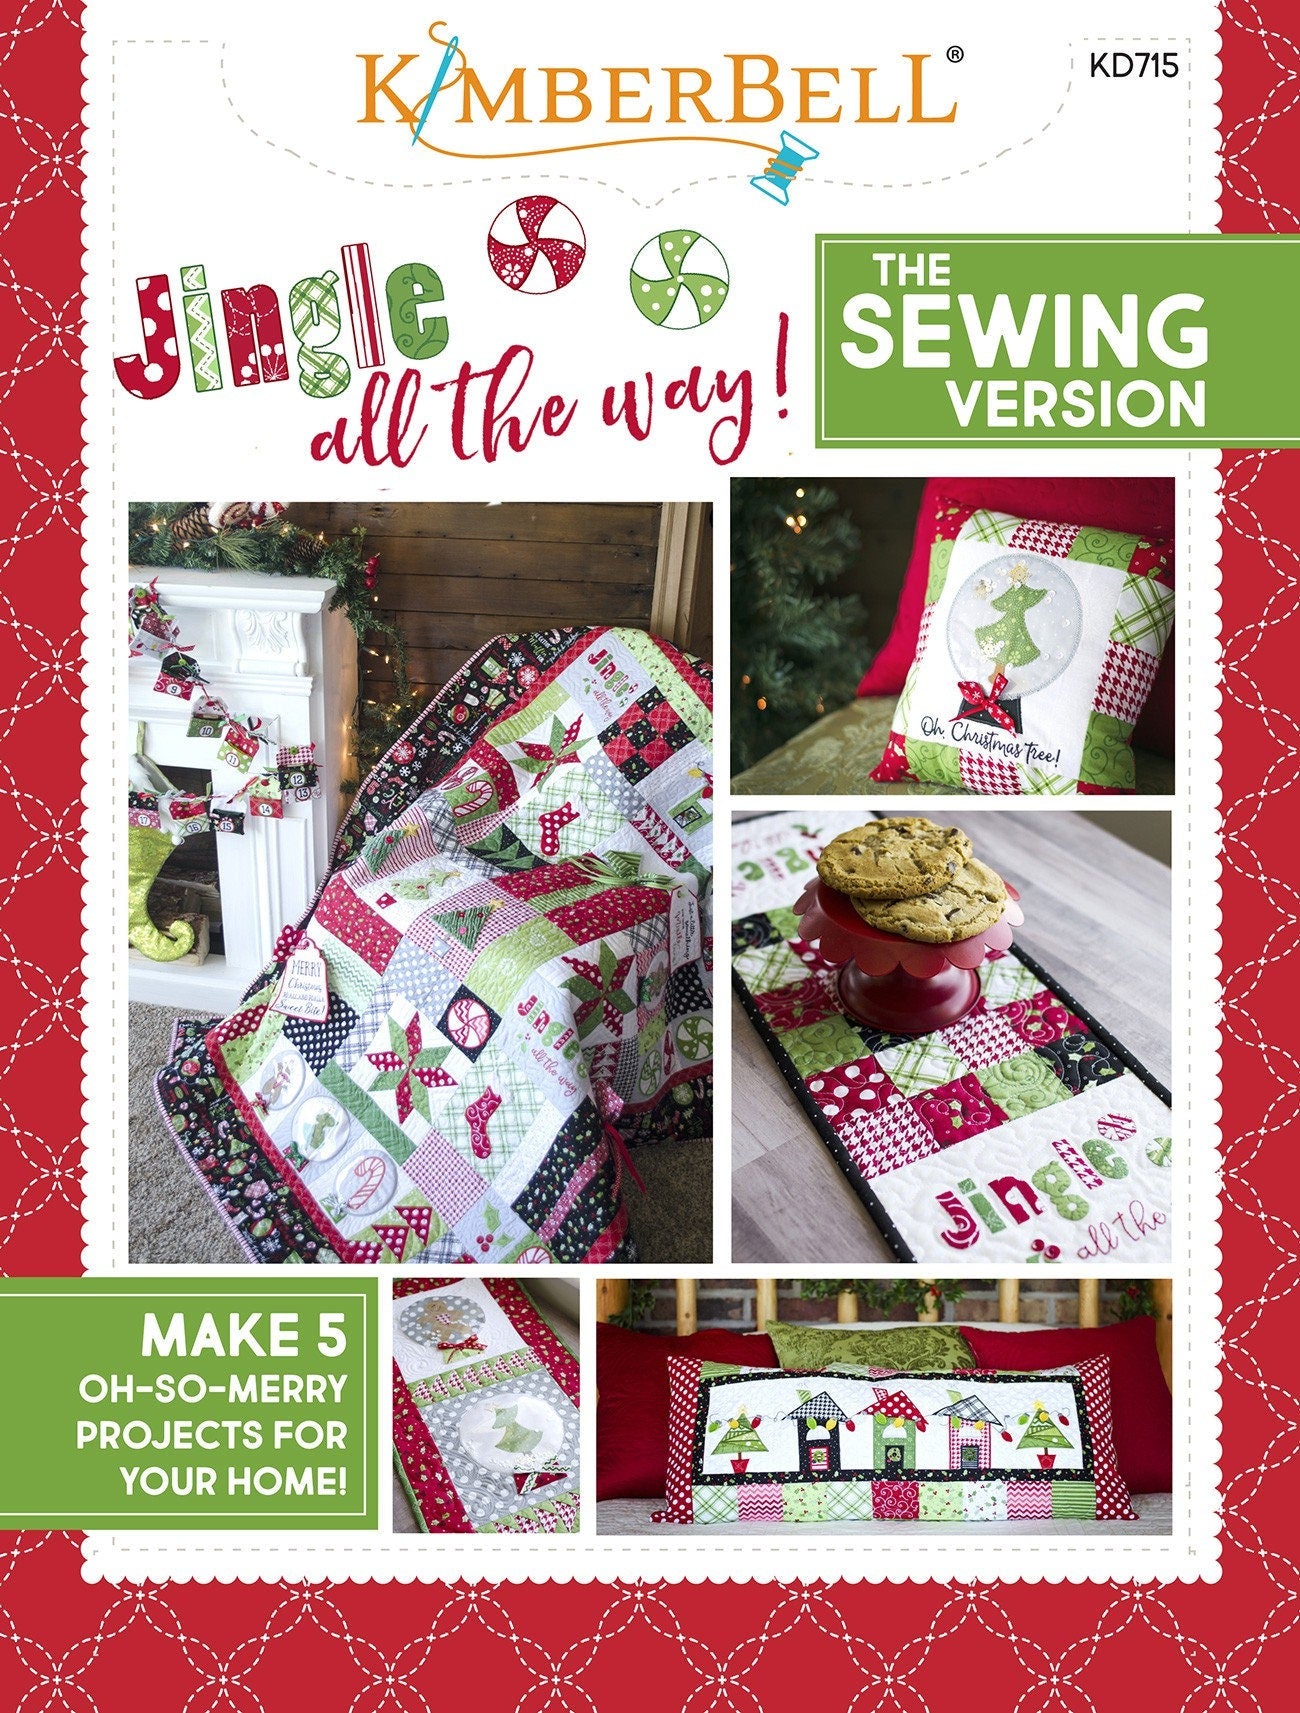 Kimberbell Jingle All the Way (The Sewing Version) Quilt Pattern Book with CD by Kim Christopherson for Kimberbell